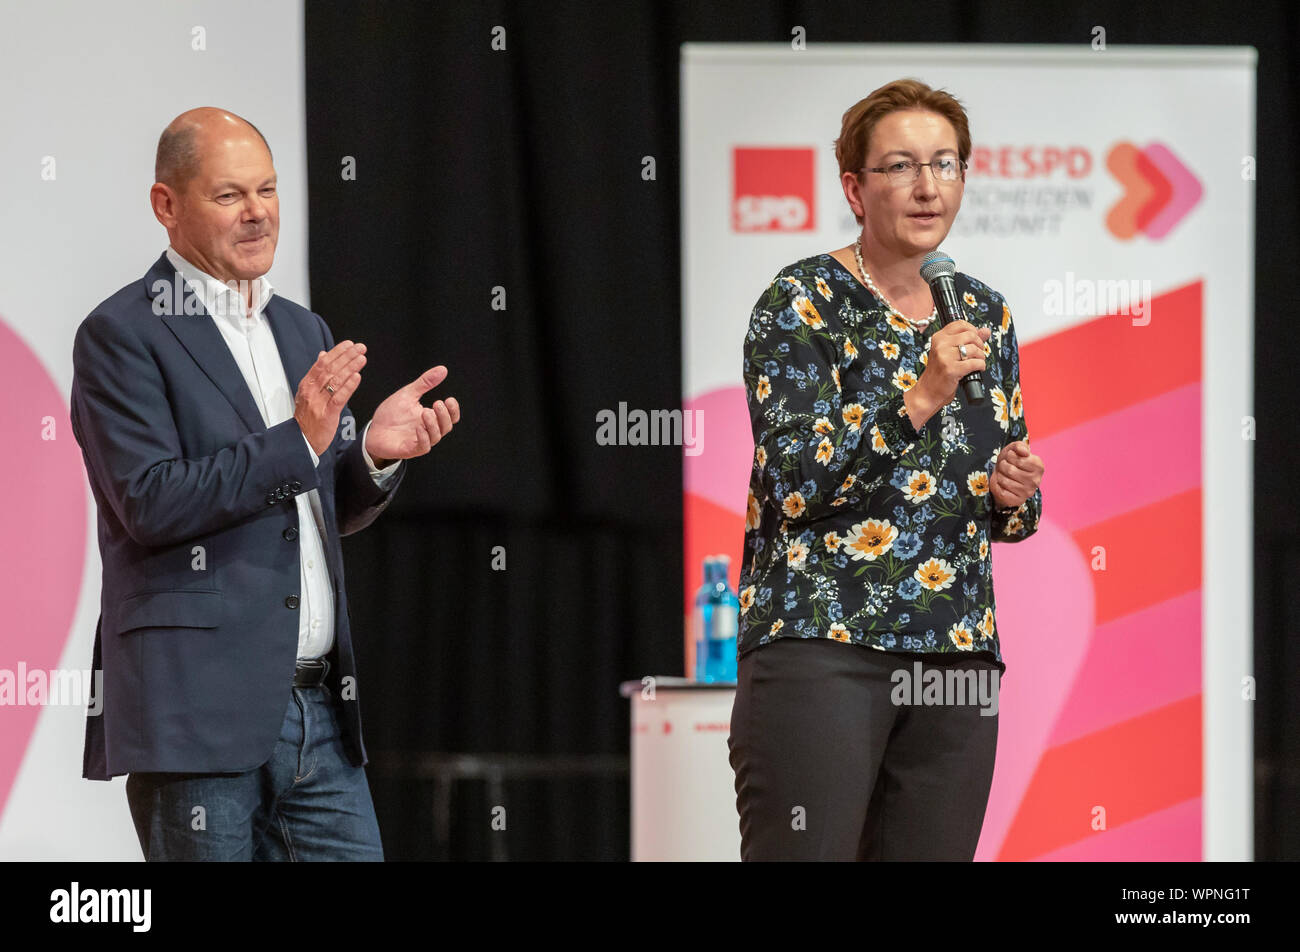 02 September 2019, Hessen, Friedberg: Olaf Scholz (SPD), Federal Minister of Finance, and Klara Geywitz (SPD), members of the Brandenburg state parliament, will stand for the election of the new party chair during the SPD regional conference. Photo: Jörg Halisch/dpa Stock Photo